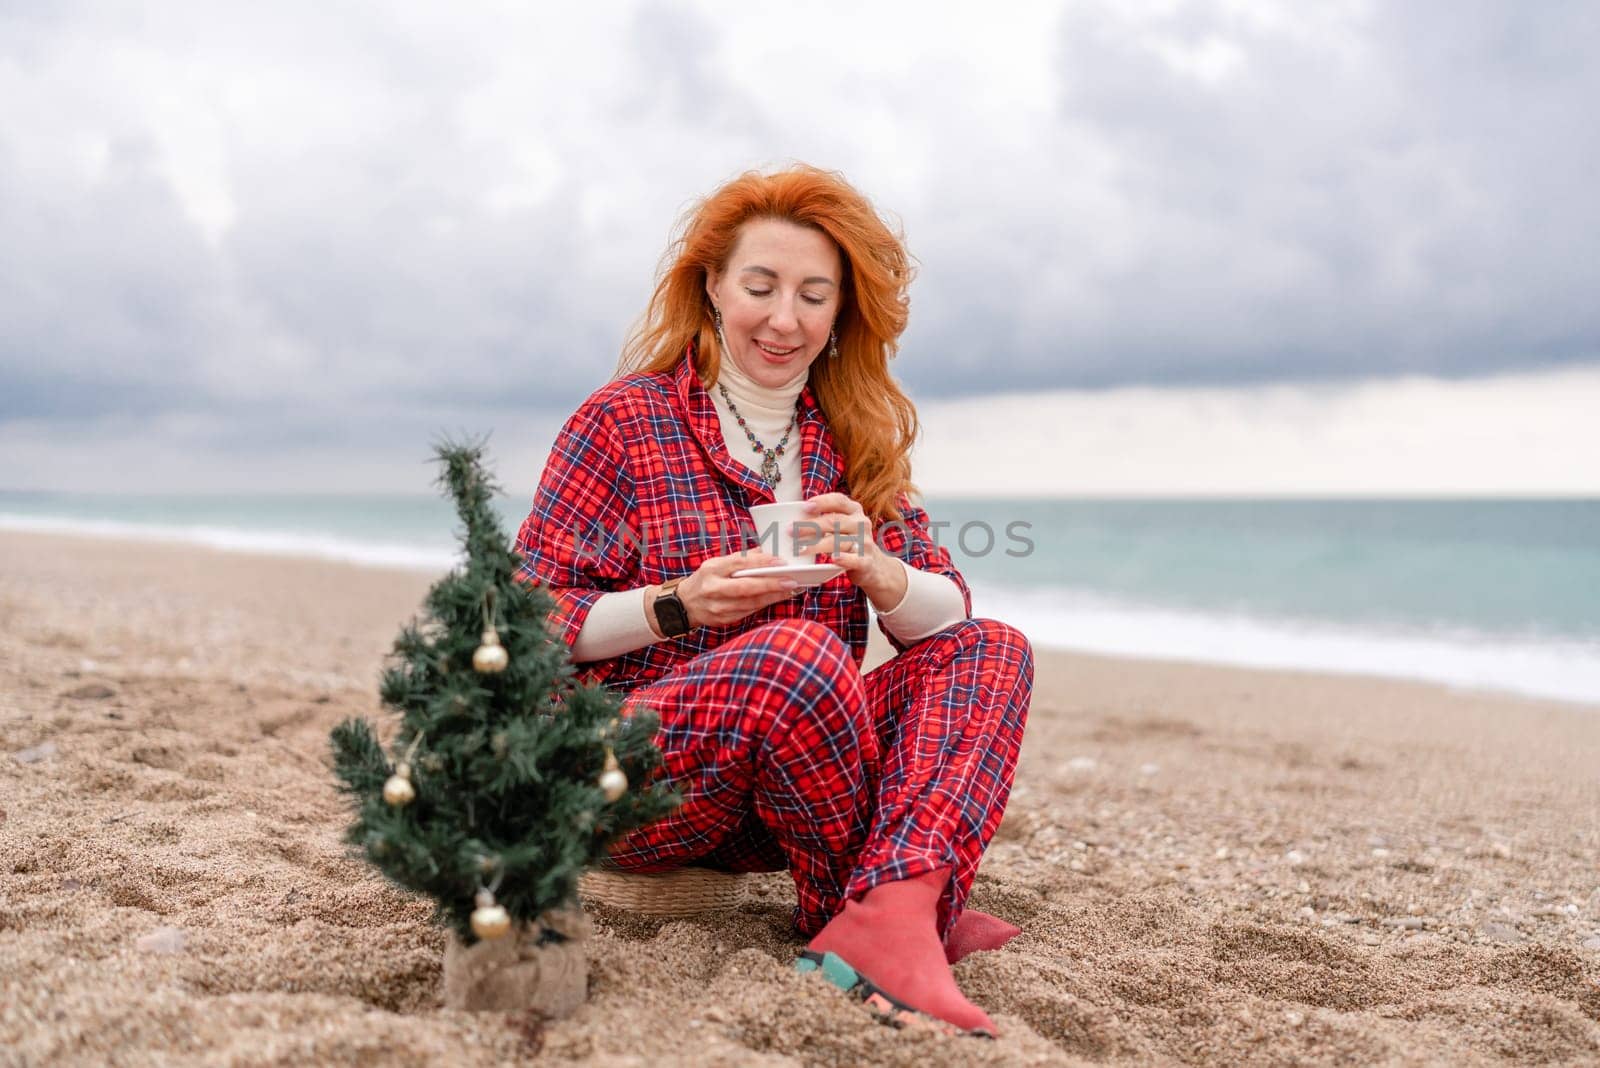 Sea Lady in plaid shirt with a mug in her hands enjoys beach with Christmas tree. Coastal area. Christmas, New Year holidays concep by Matiunina